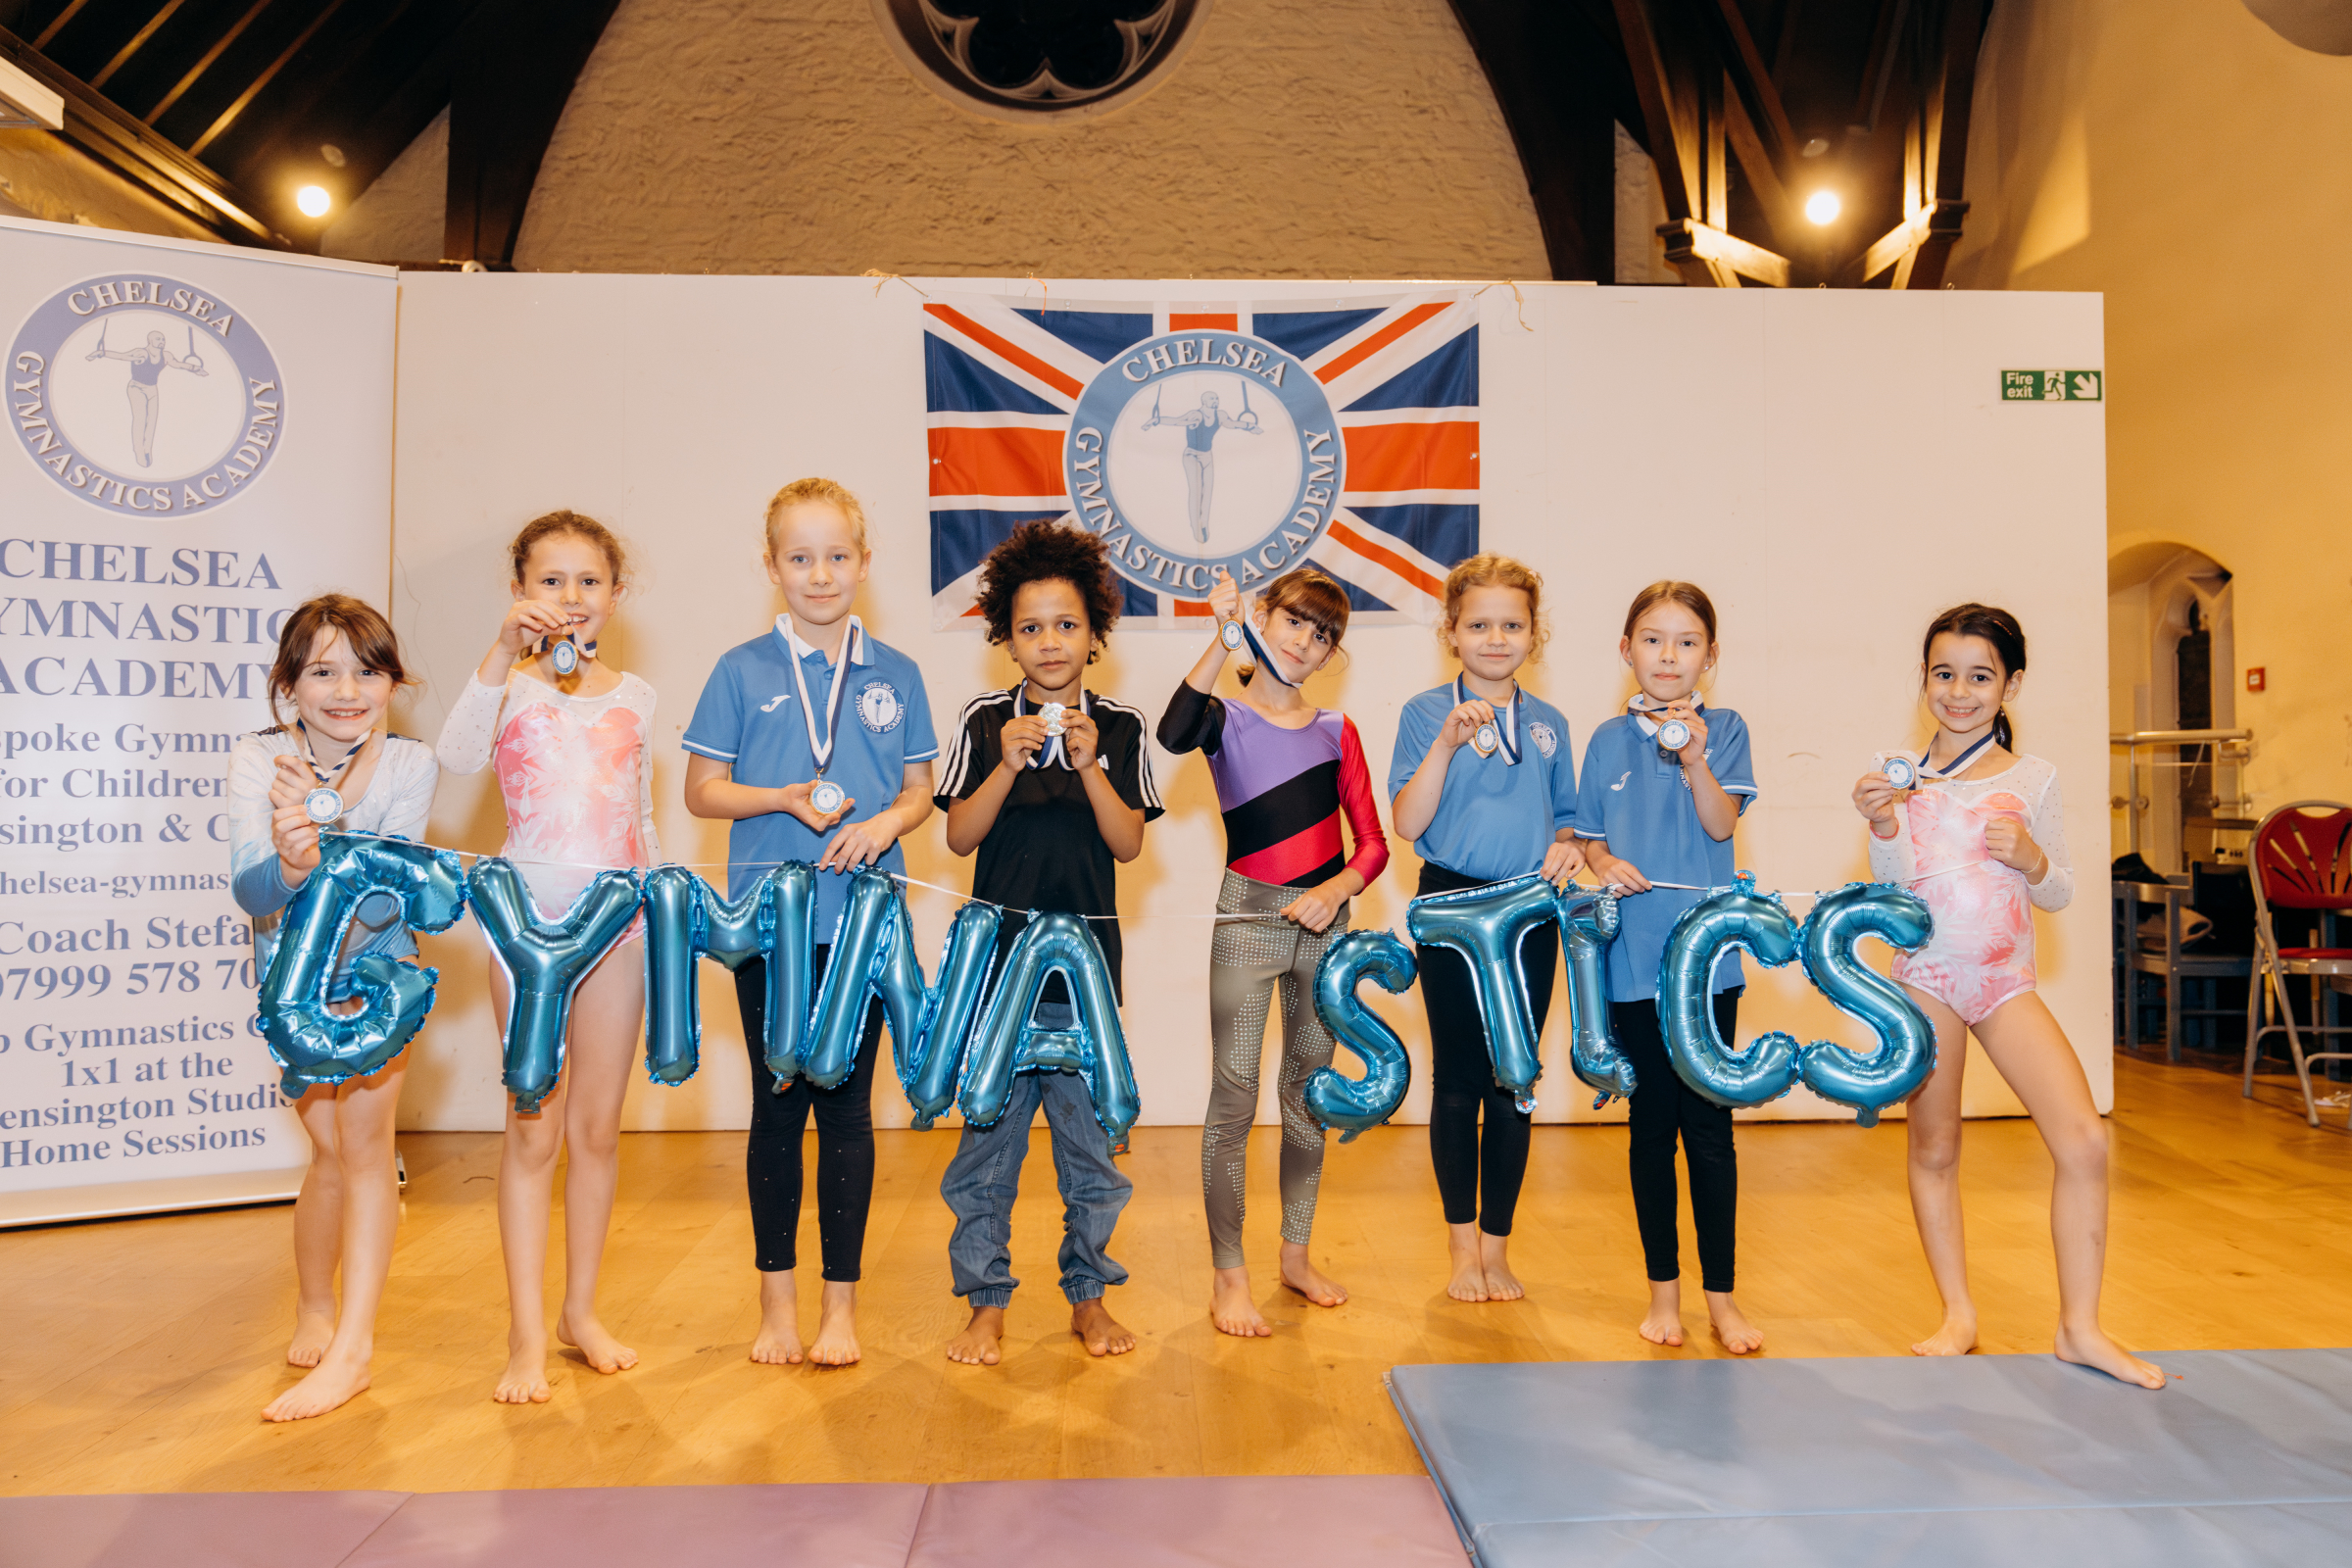 Gymnastics Class for Children in Kensington and Chelsea London